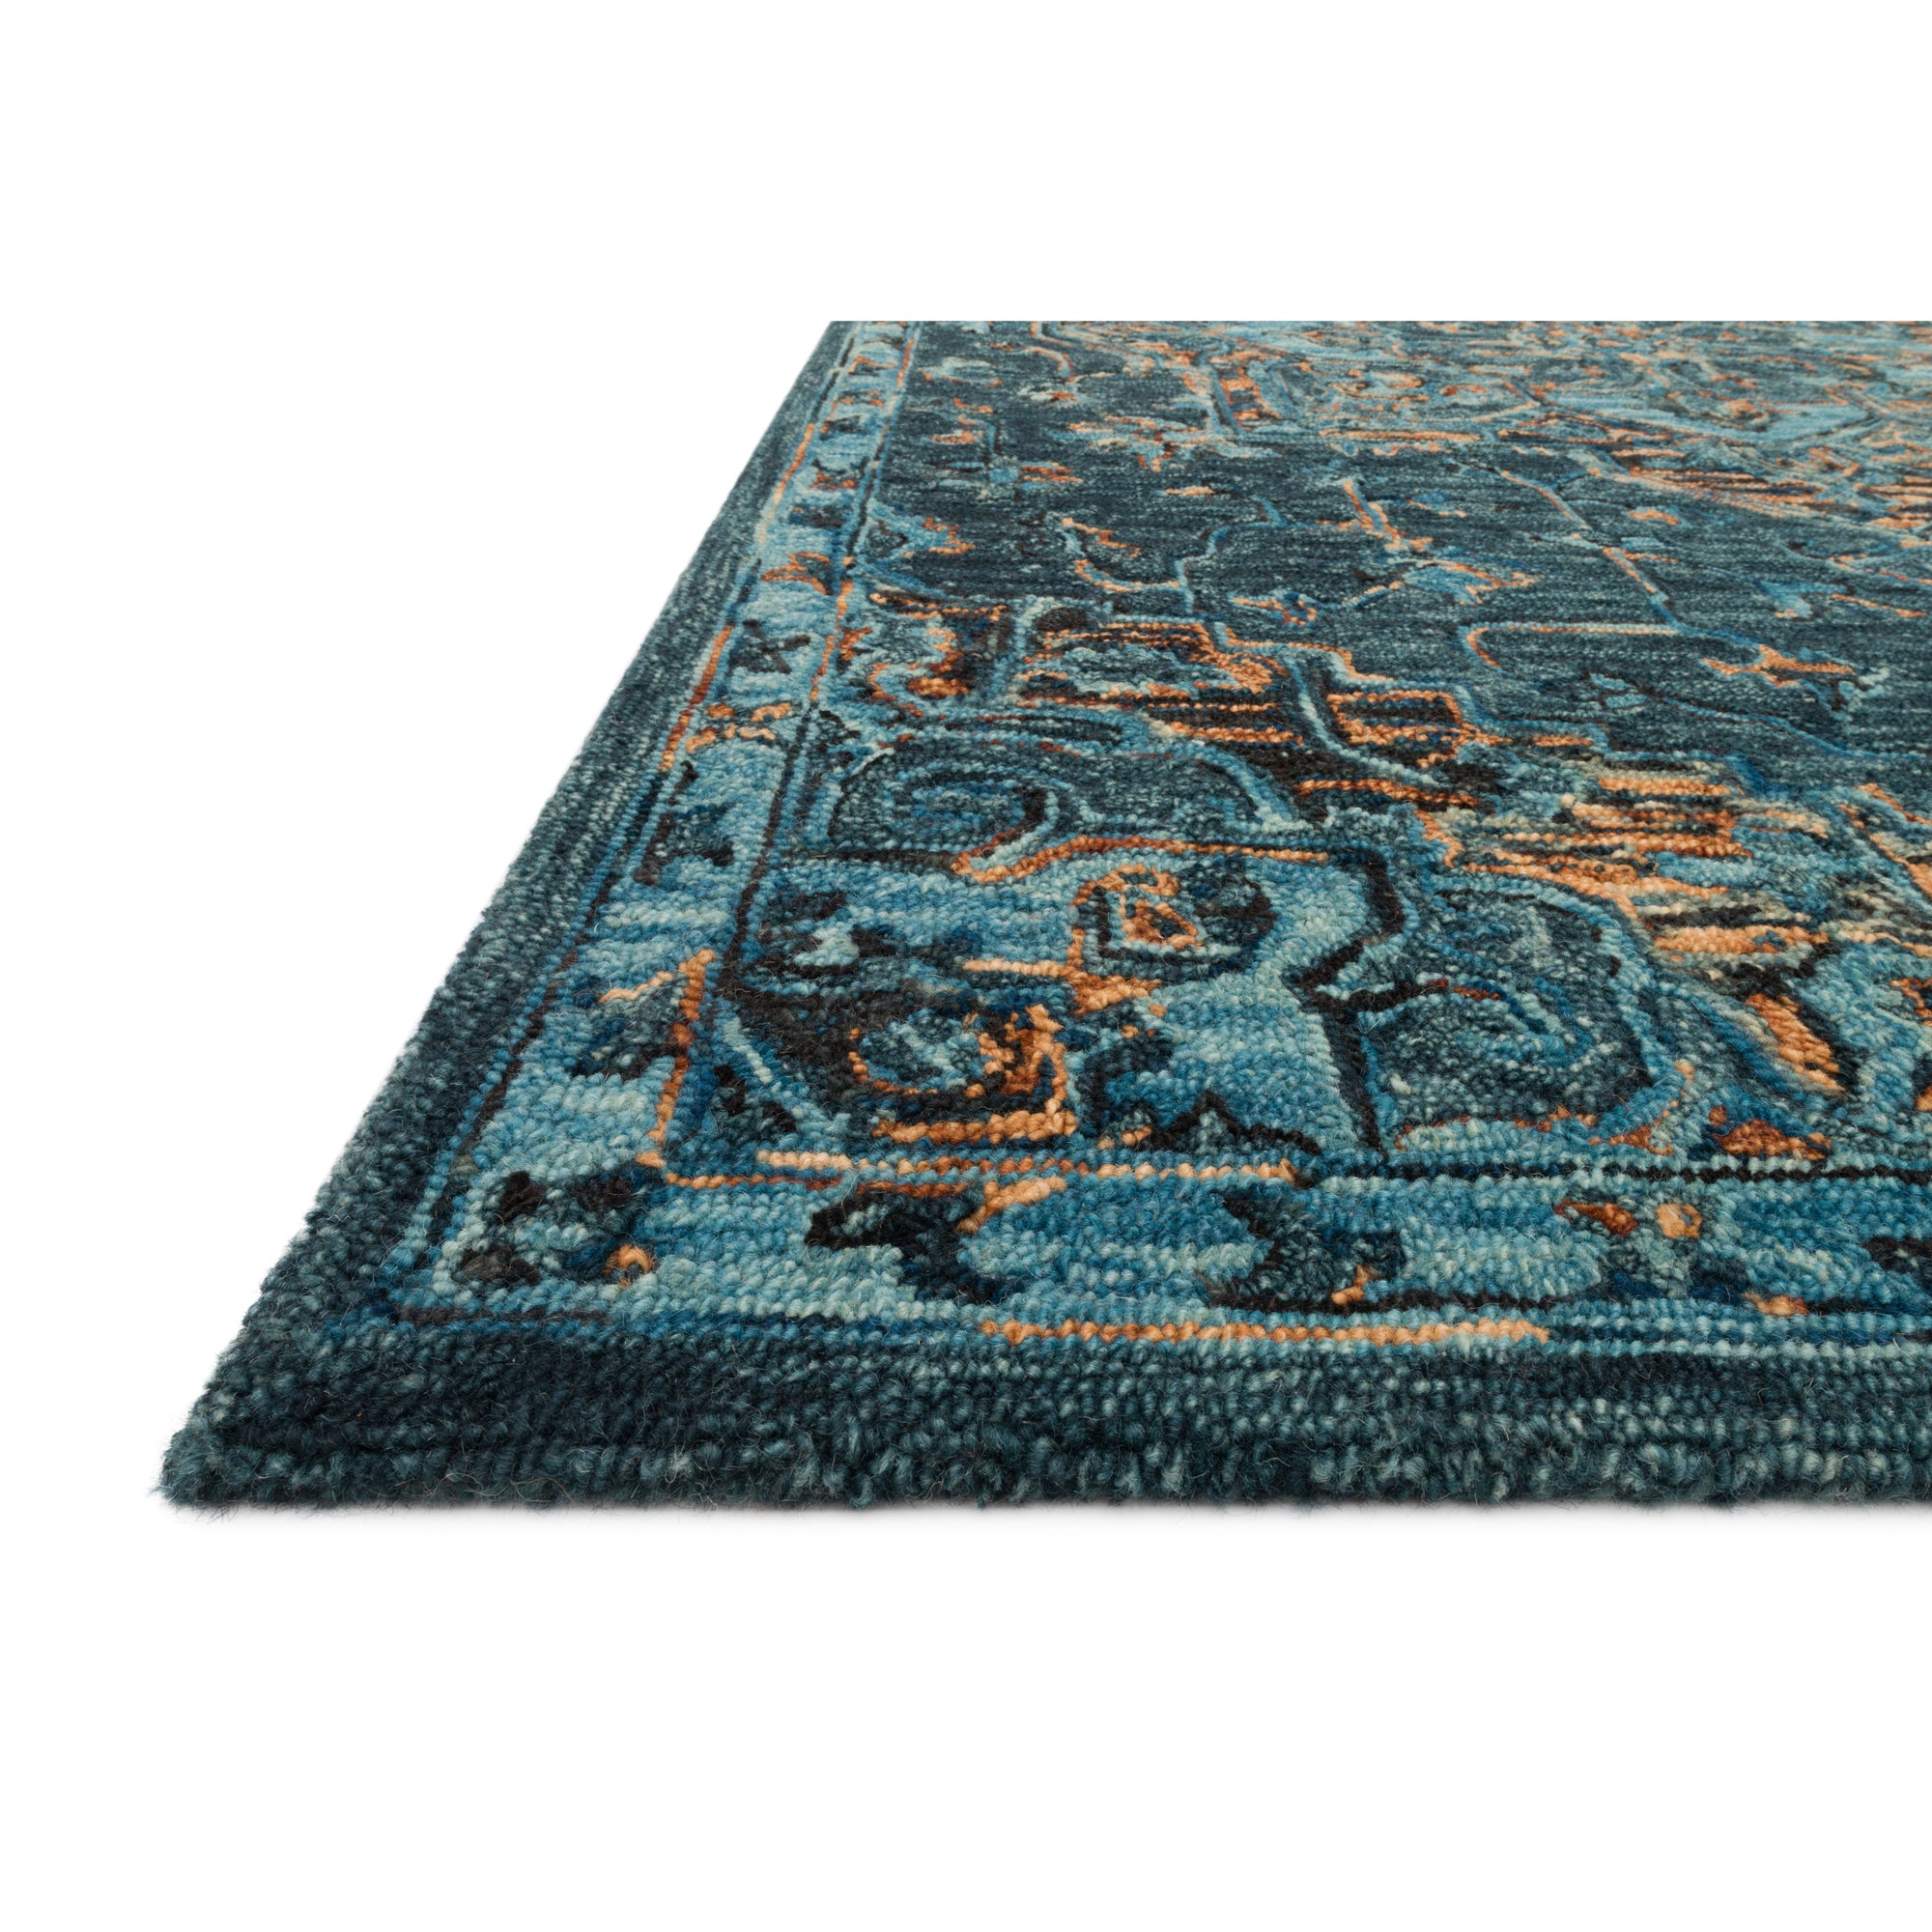 Rugs by Roo Loloi Victoria Teal Multi Area Rug in size 18" x 18" Sample